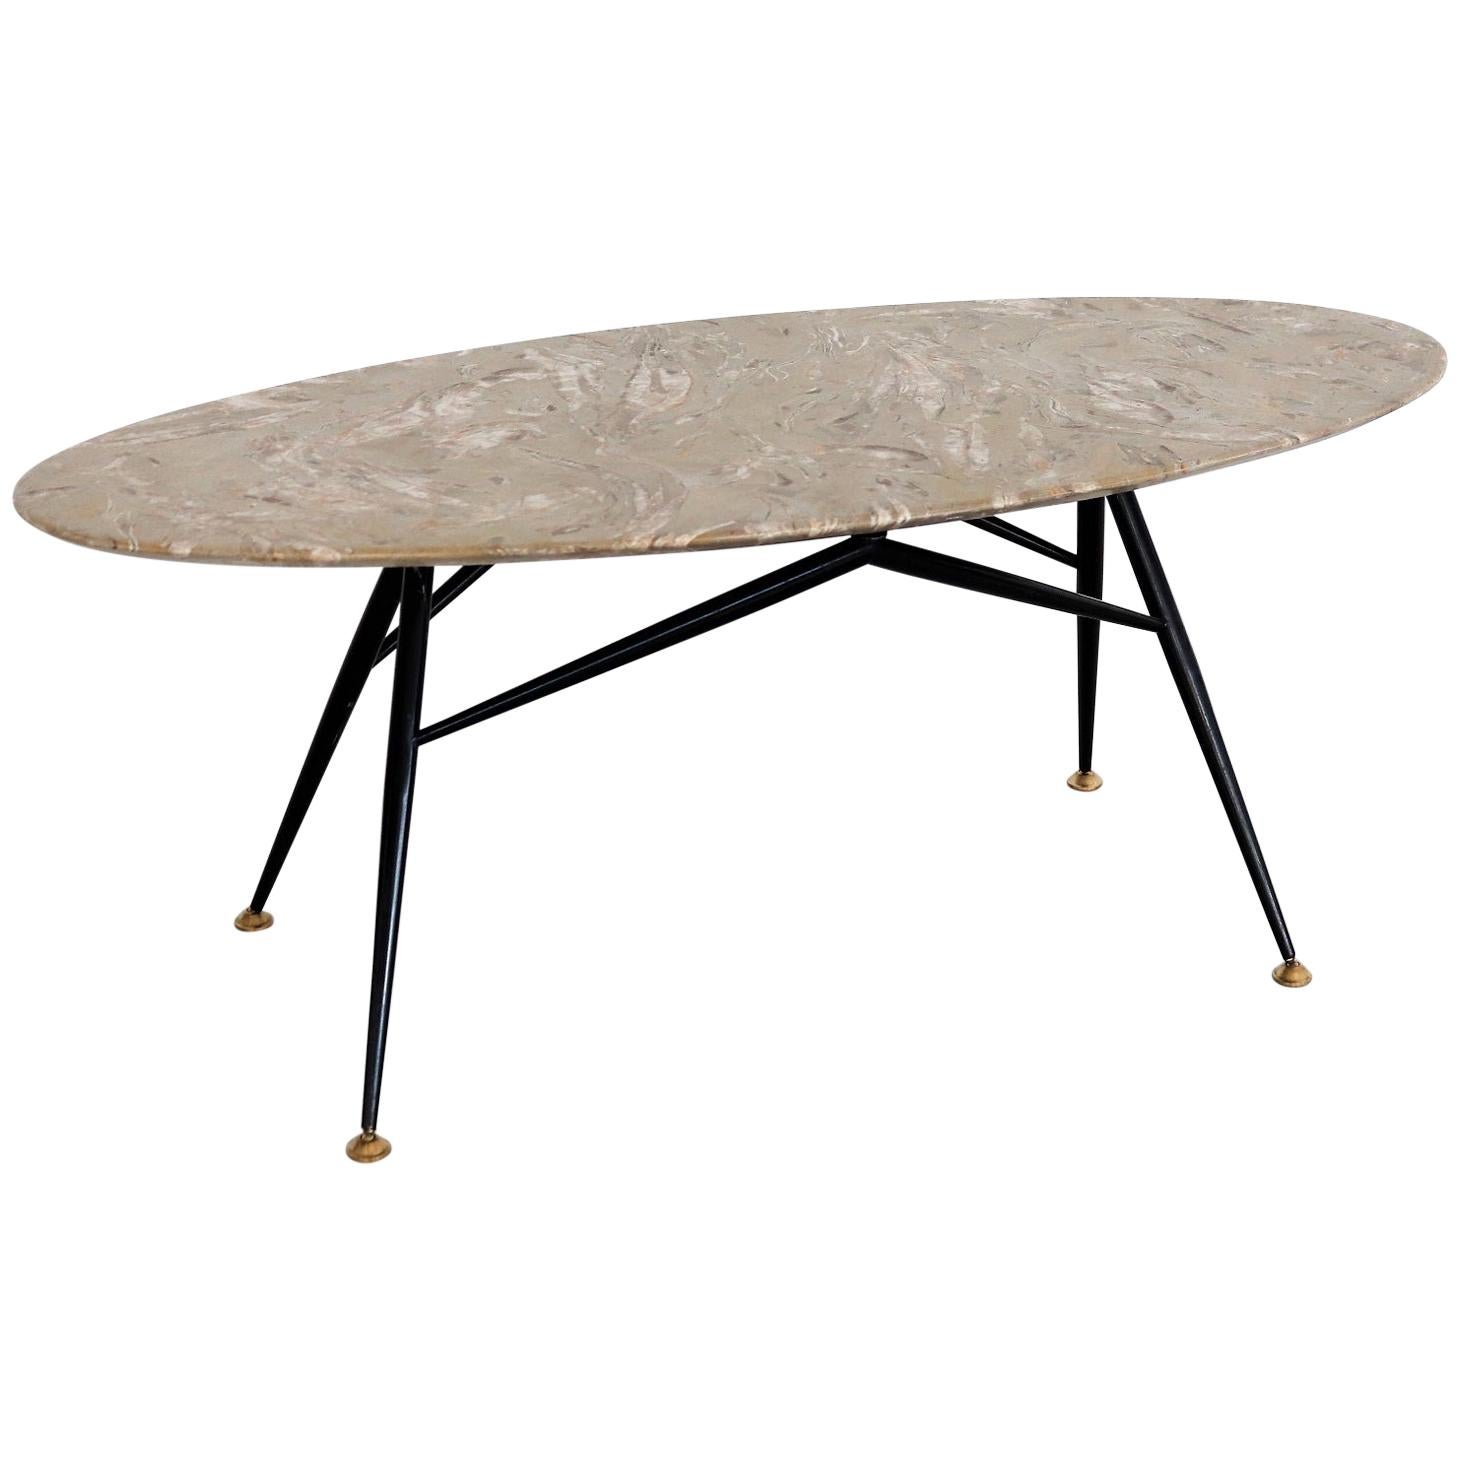 Italian Midcentury Oval Coffee Table with Marble Top and Brass Tips, 1950s